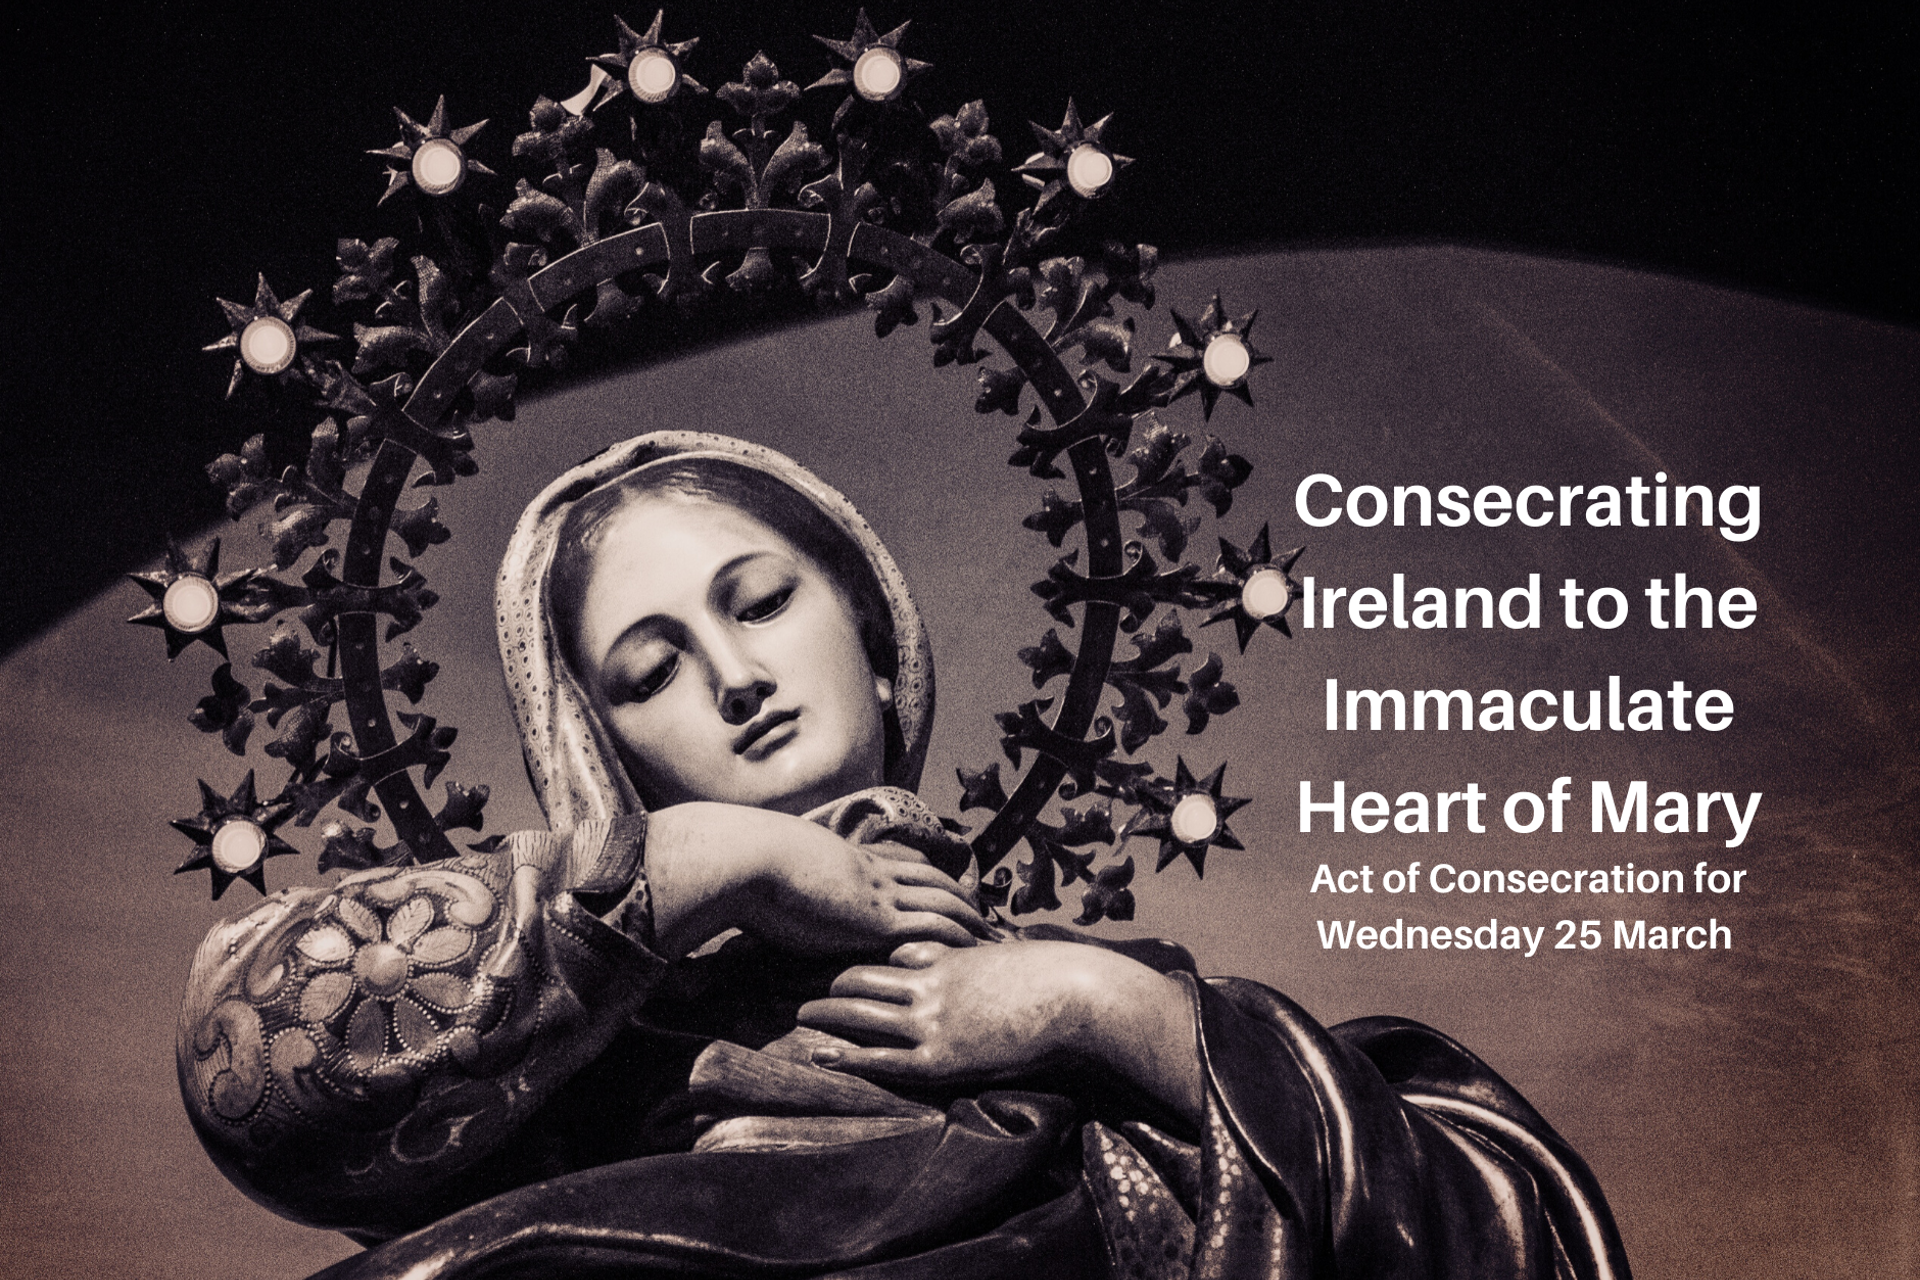 Order of Service for Act of Consecration of Ireland to Immaculate Heart of Mary